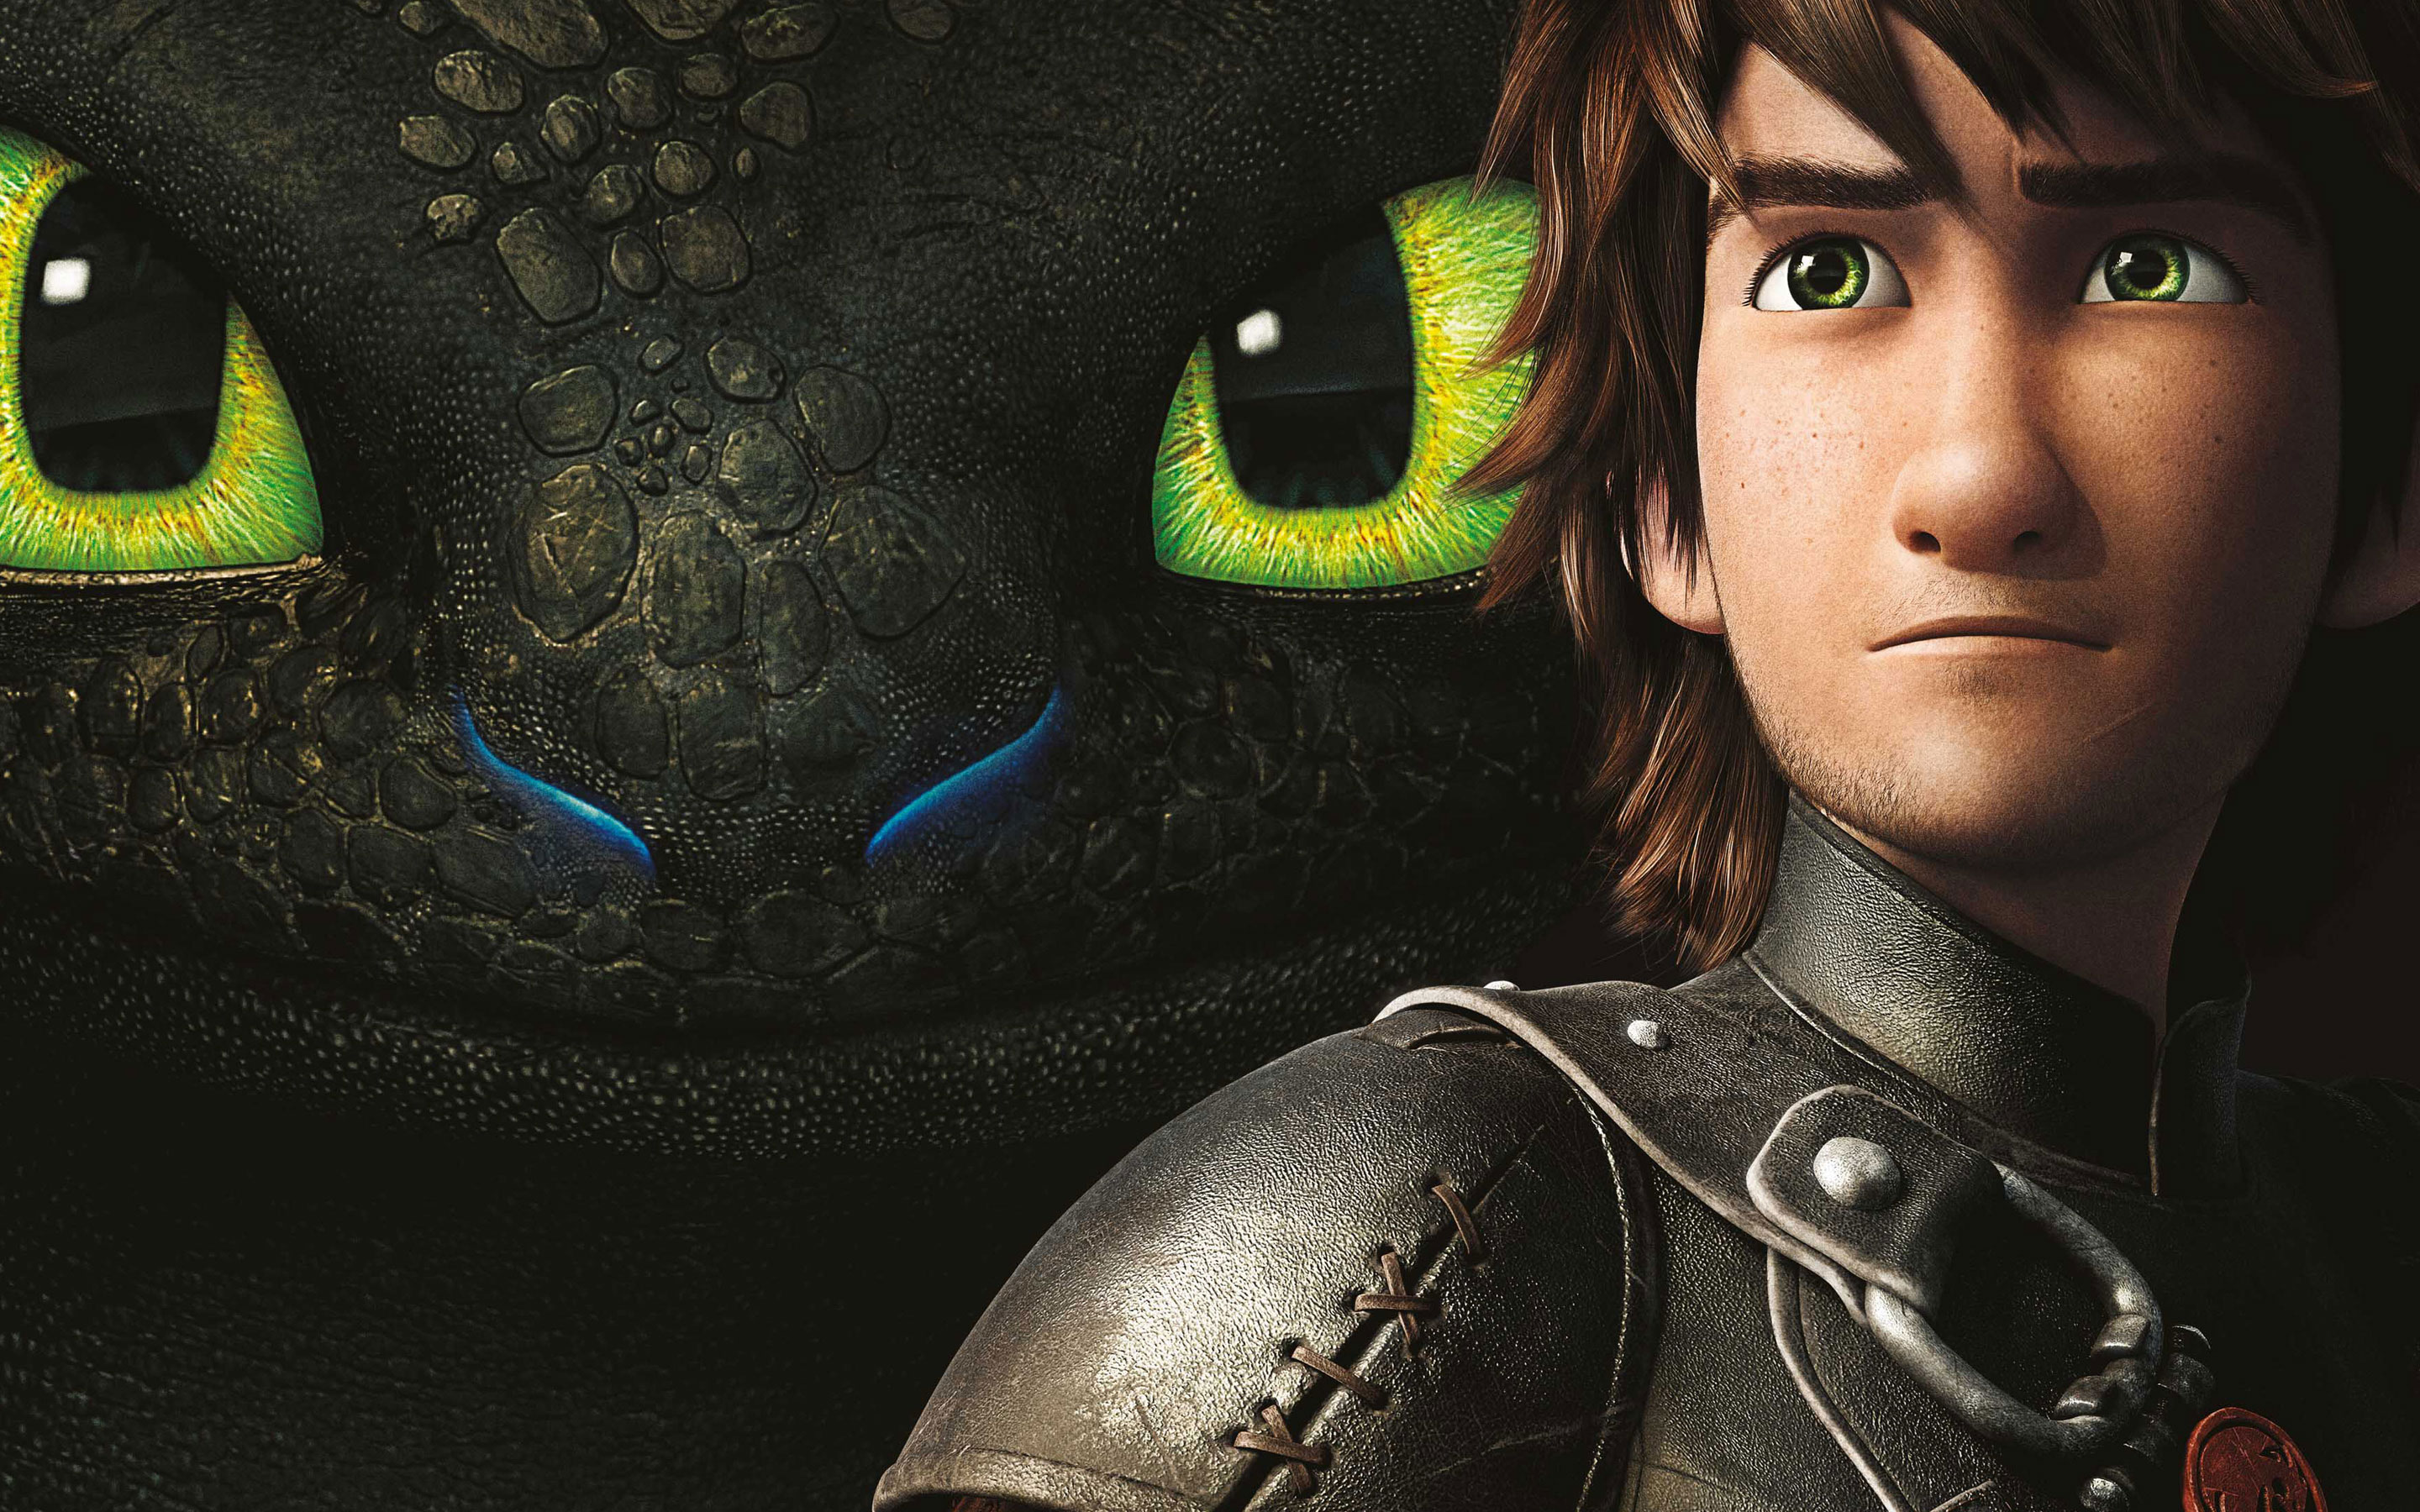 how to train your dragon 2 movie wallpaper